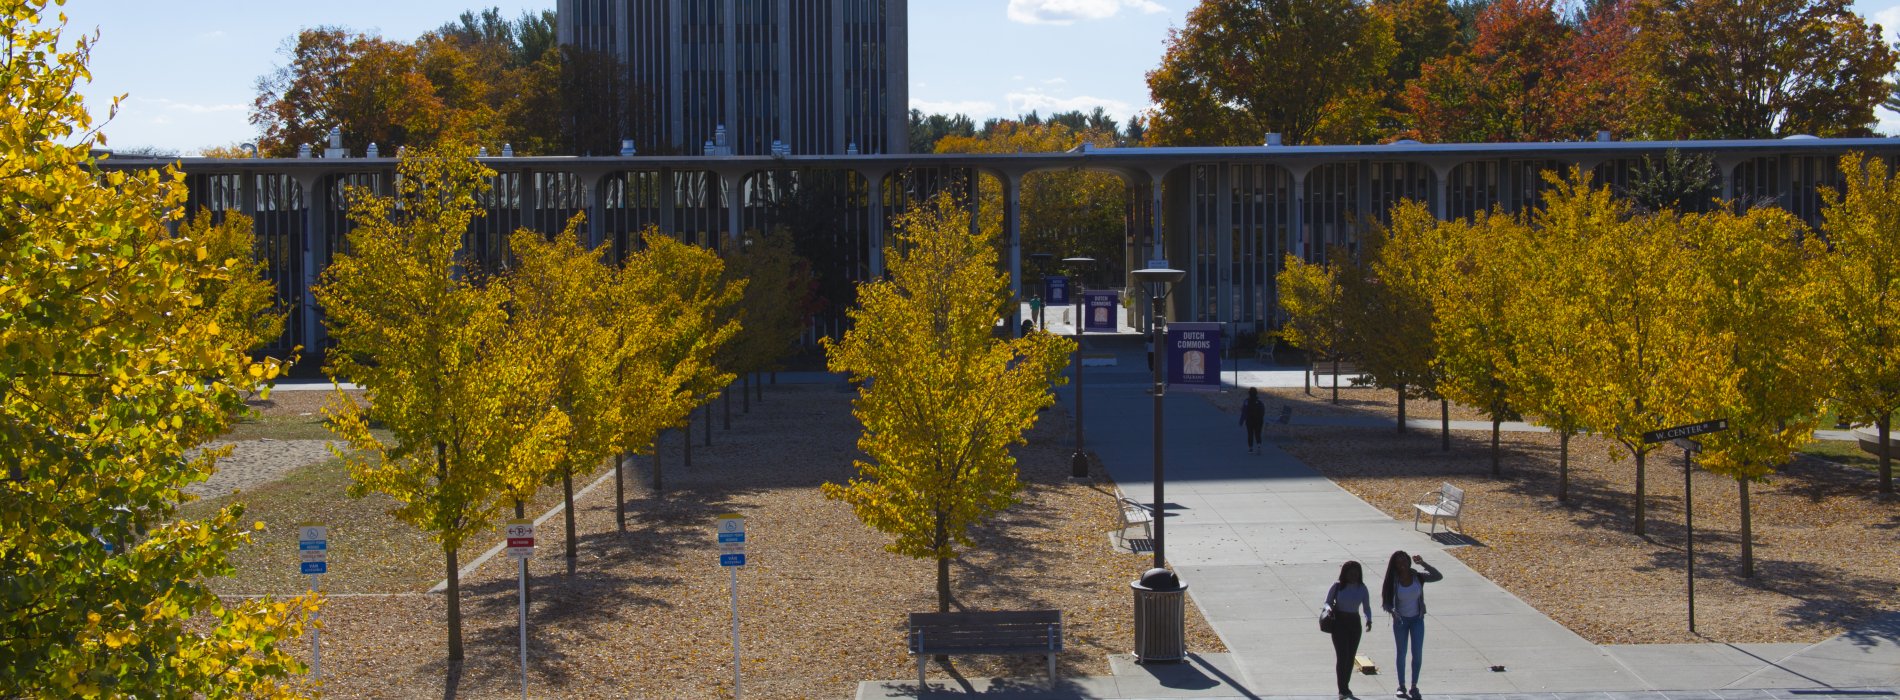 Students walking on UAlbany campus during Fall foliage